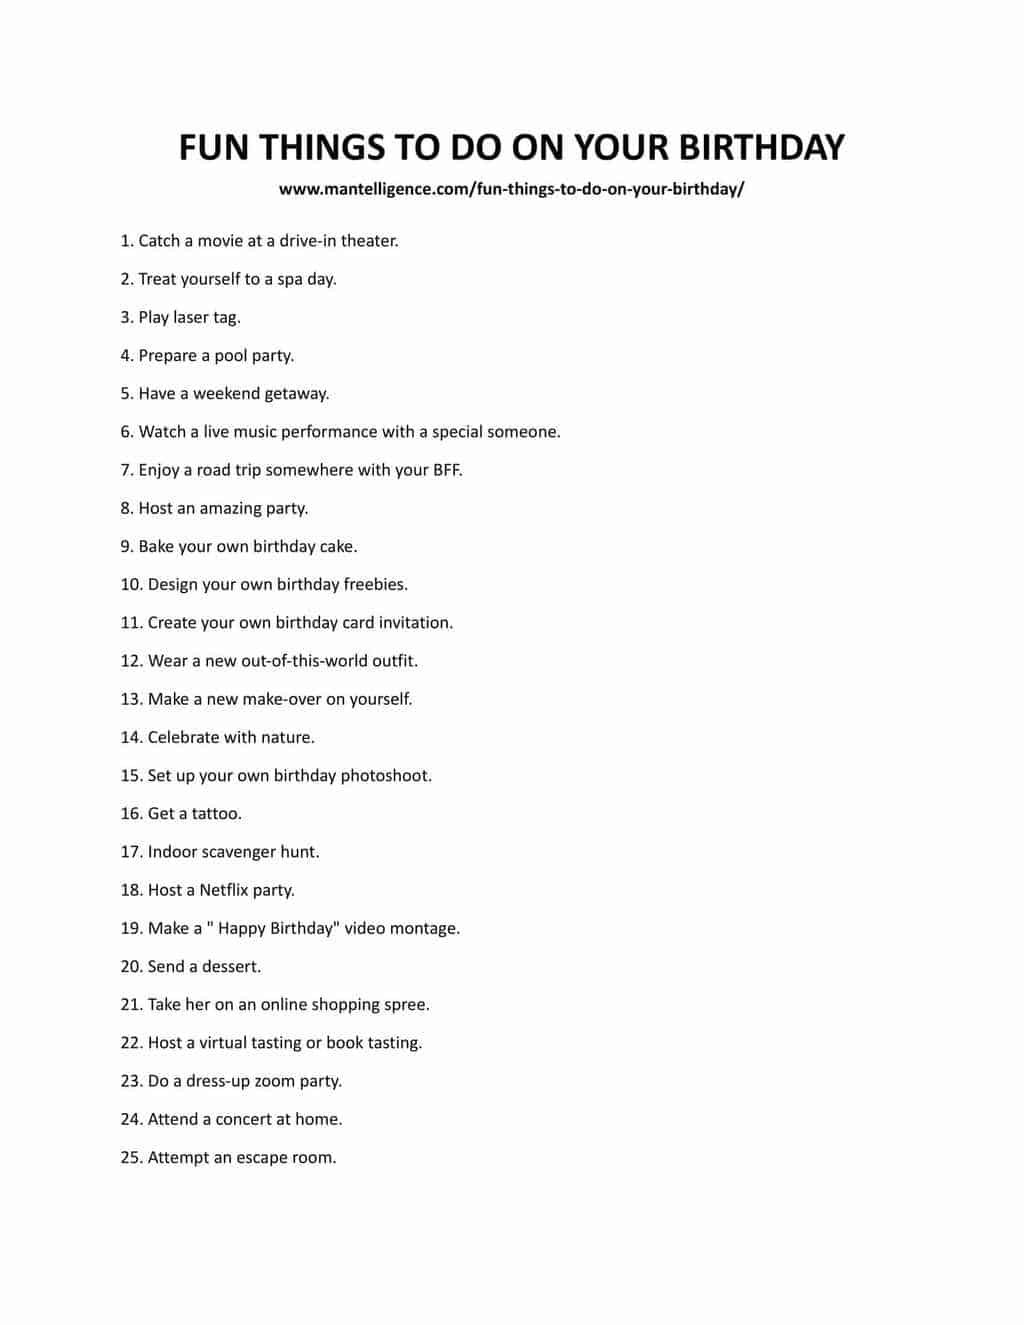 Downloadable list of fun things to do